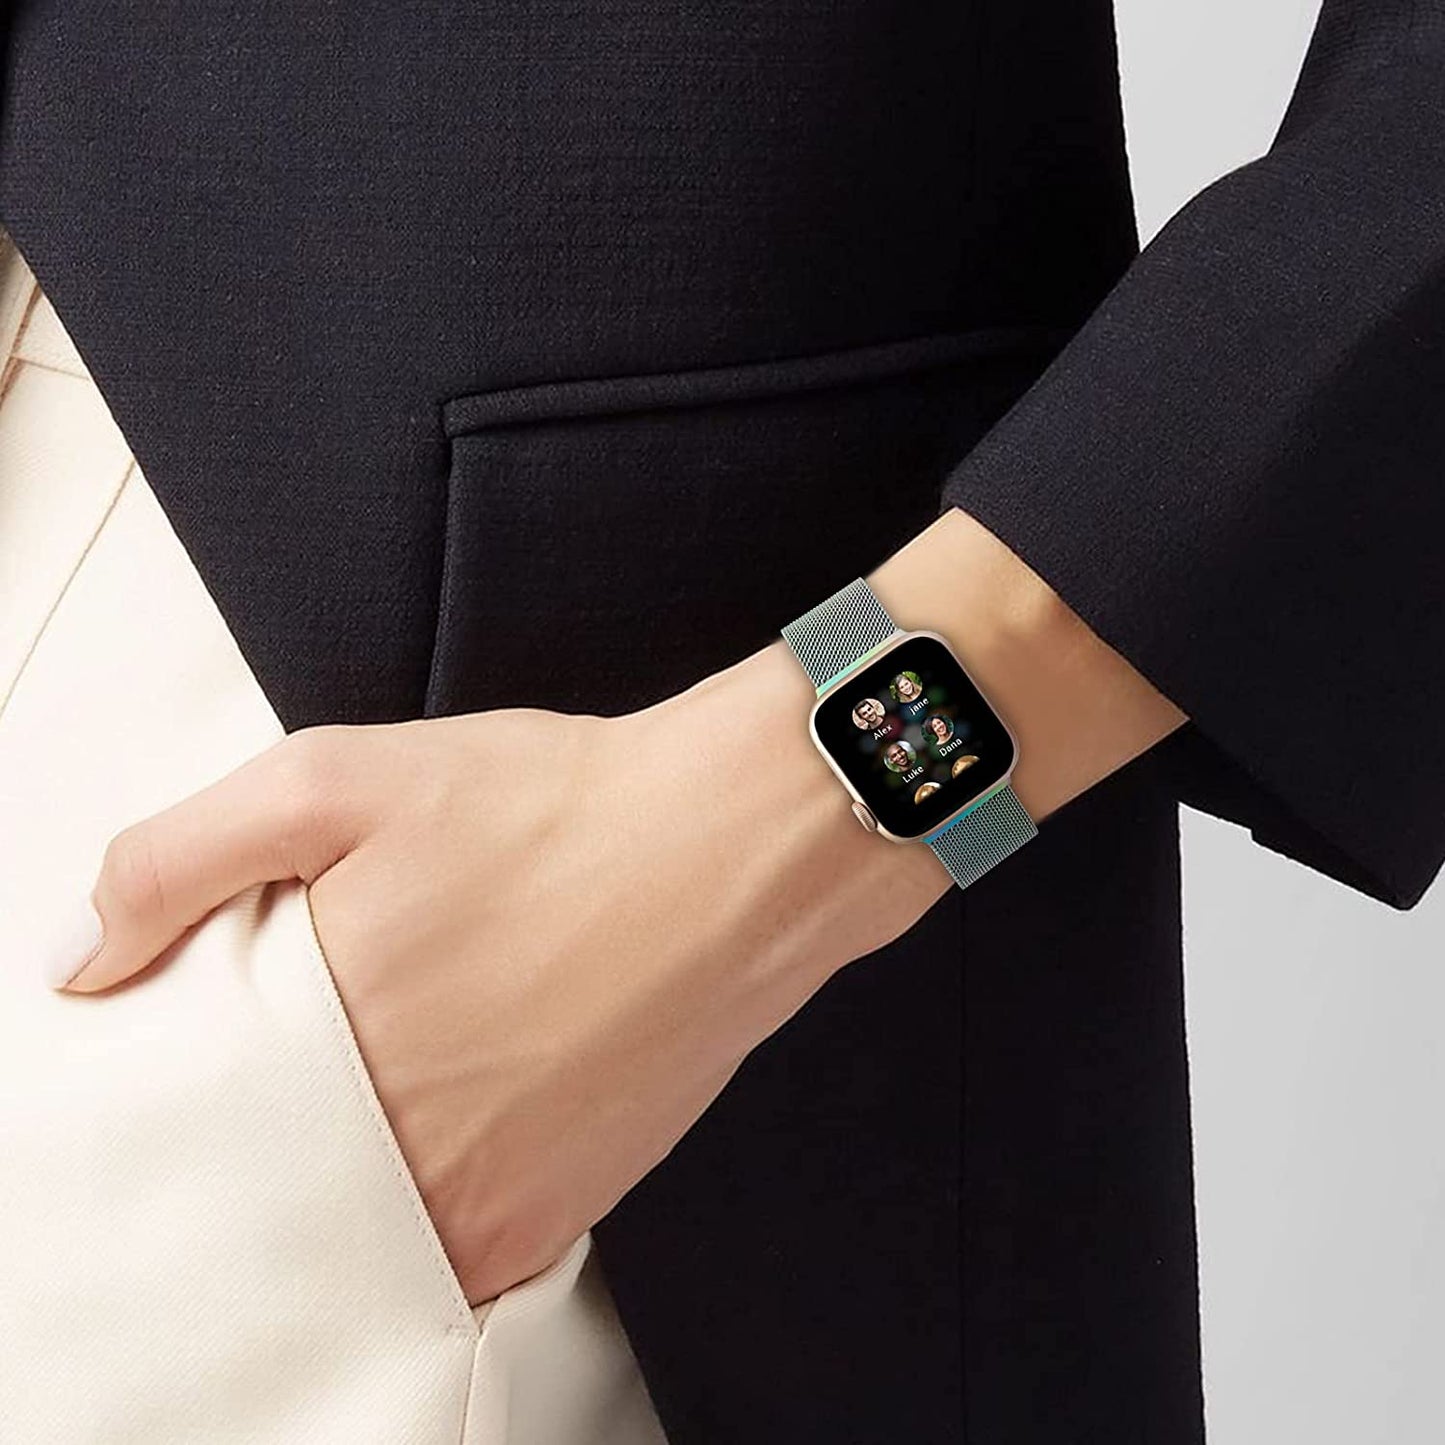 Magnetisches Milanaise-Armband | Apple Watch